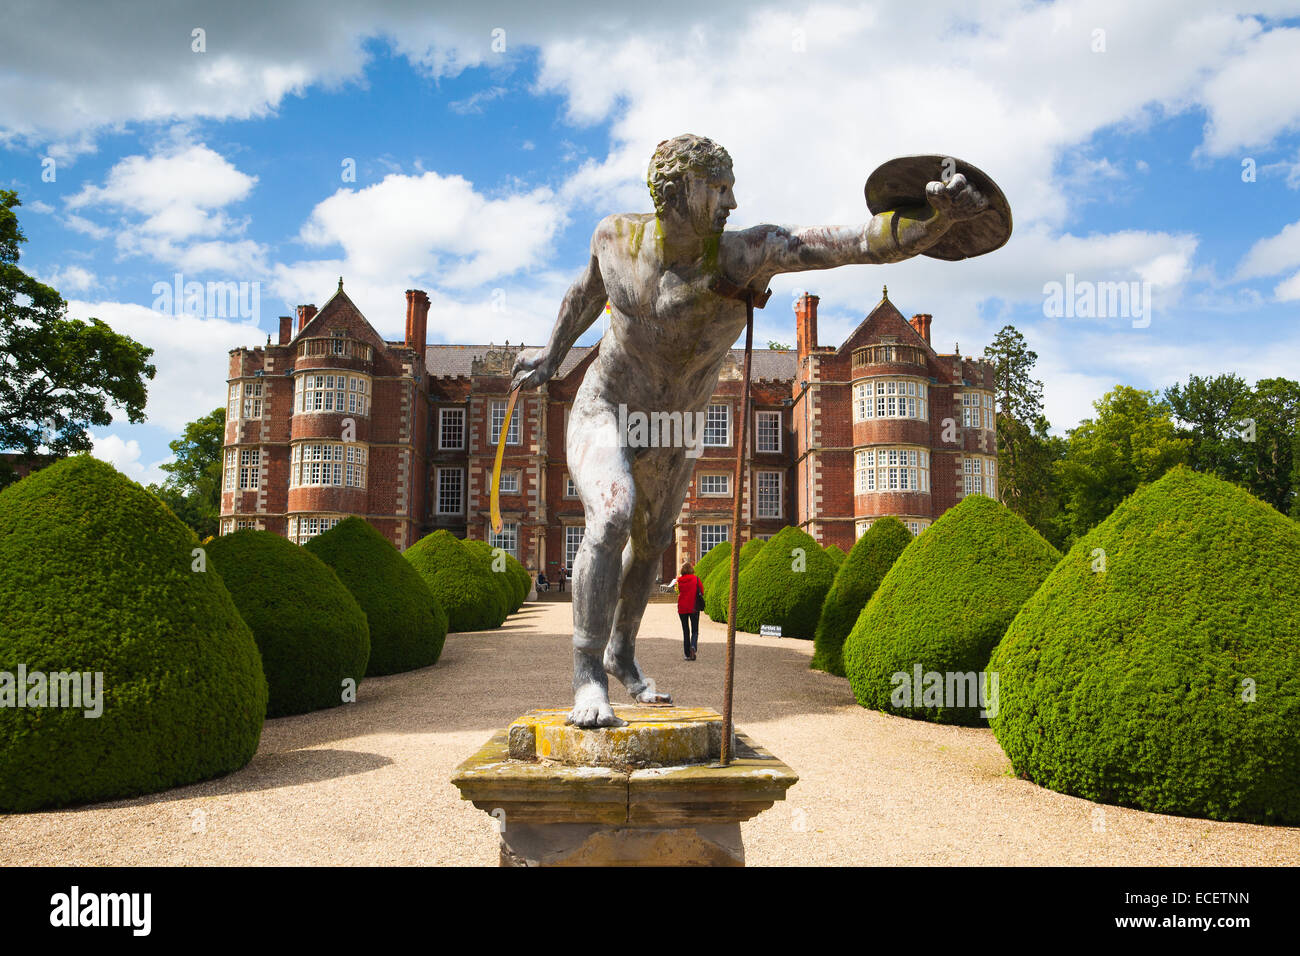 BURTON AGNES-ENGLAND,JULY 15,2012: Burton Agnes Hall is an Elizabethan manor house in the village of Burton Agnes in the East Ri Stock Photo